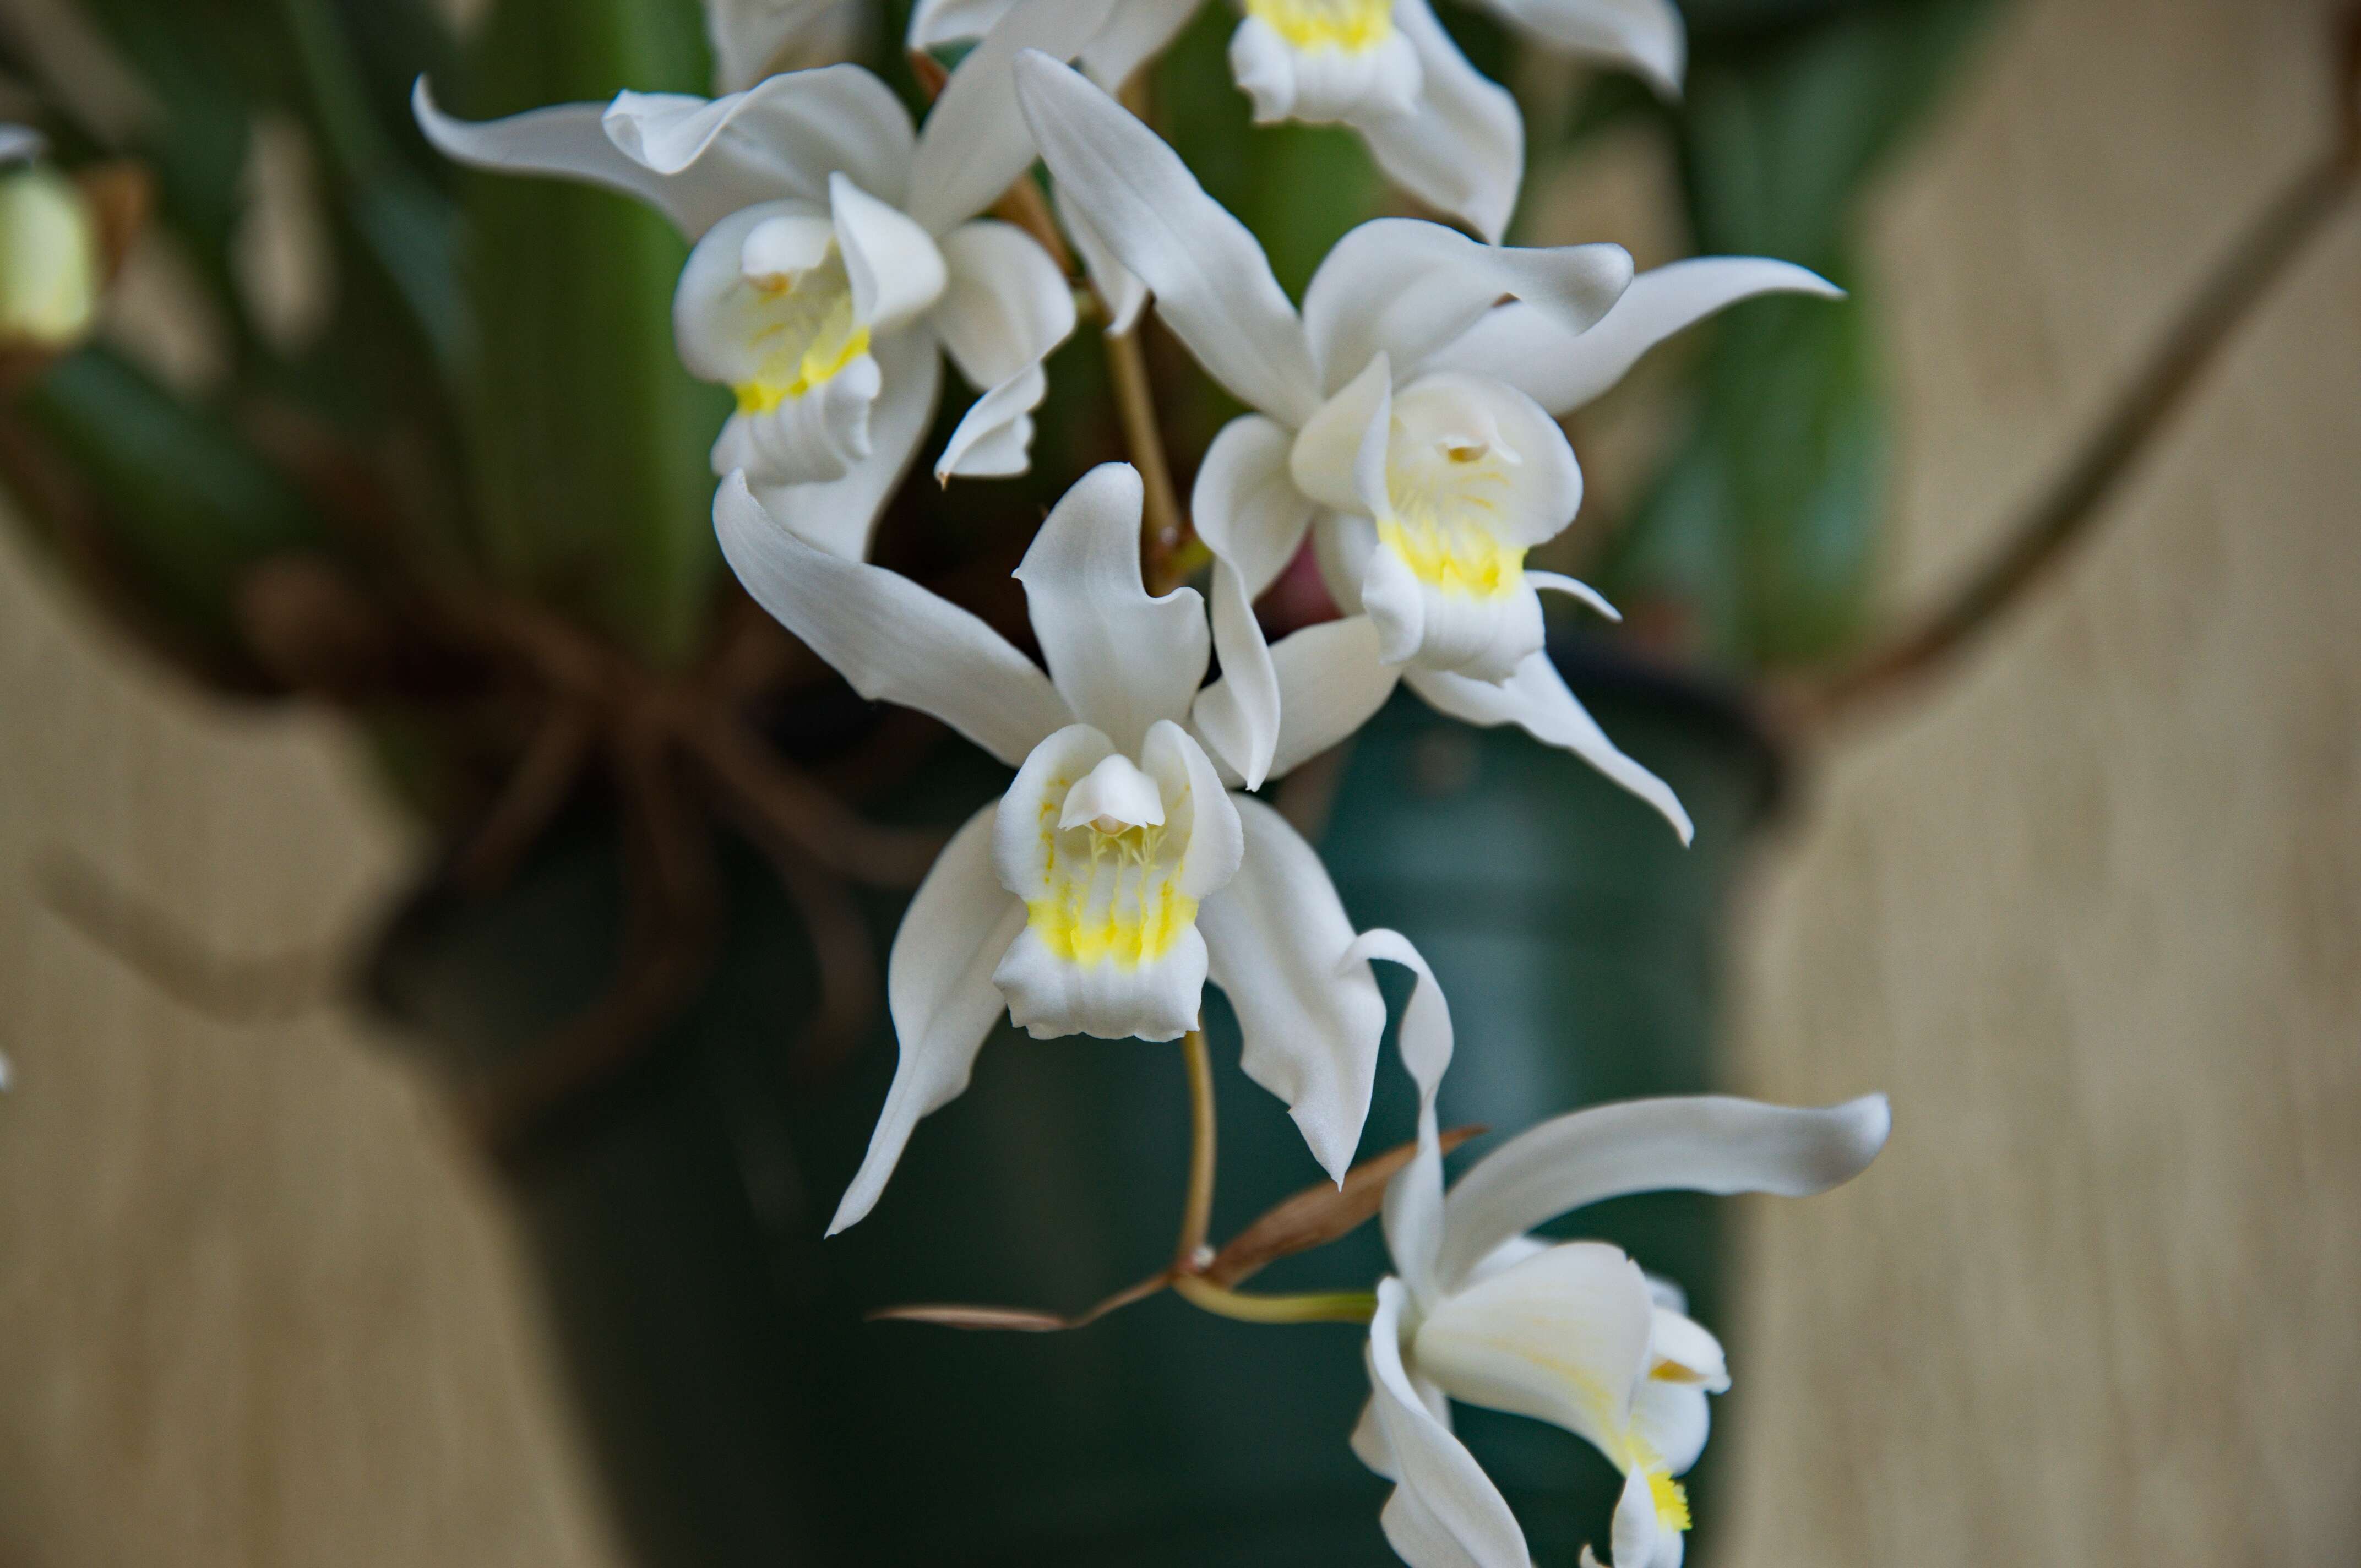 Image of Coelogyne Unchained Melody